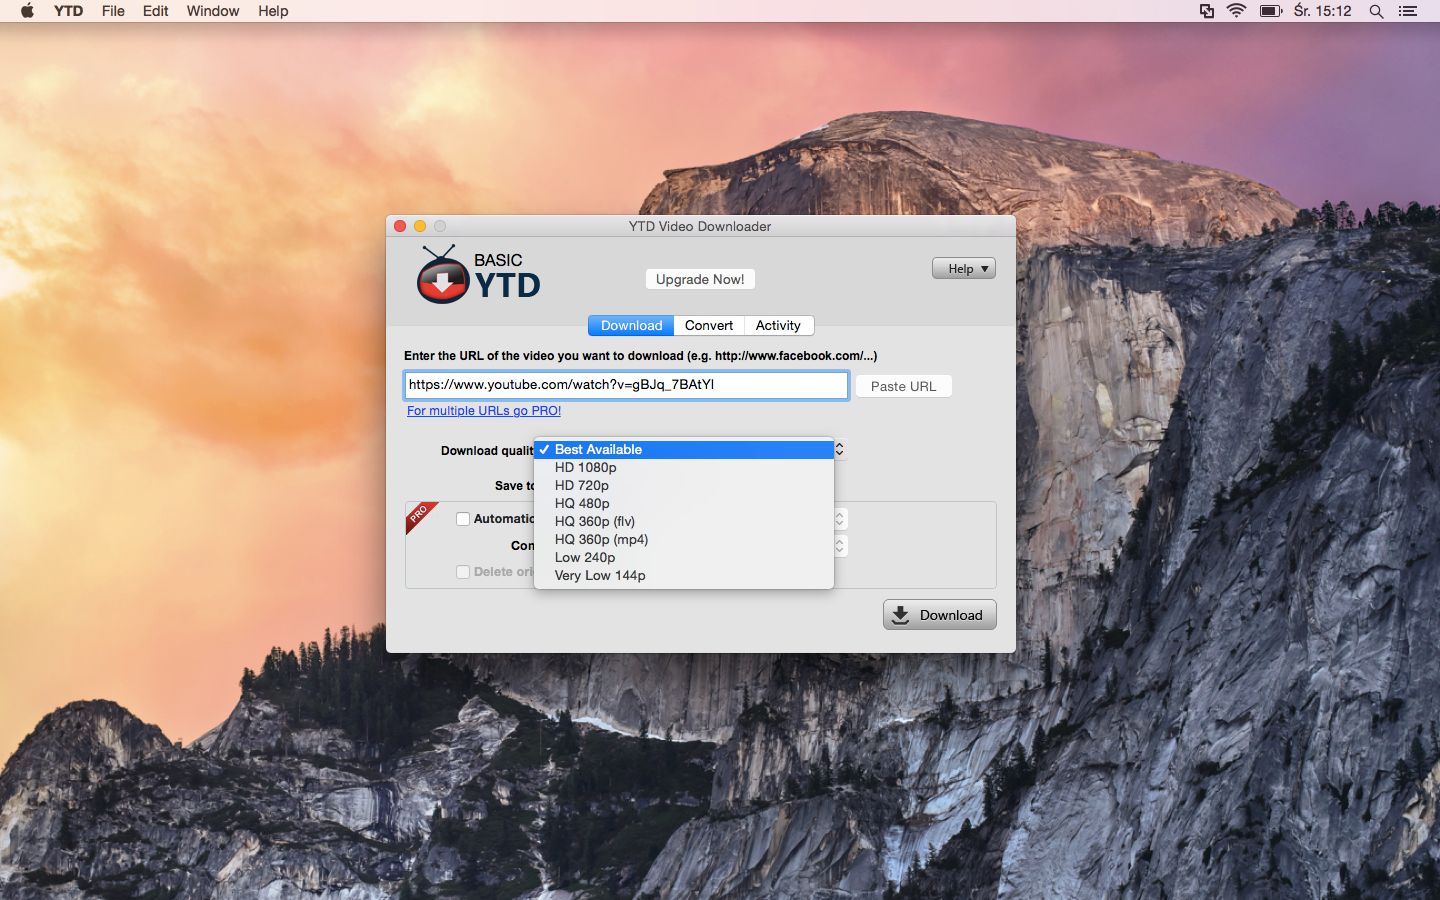 download the new version for apple YTD Video Downloader Pro 7.6.2.1